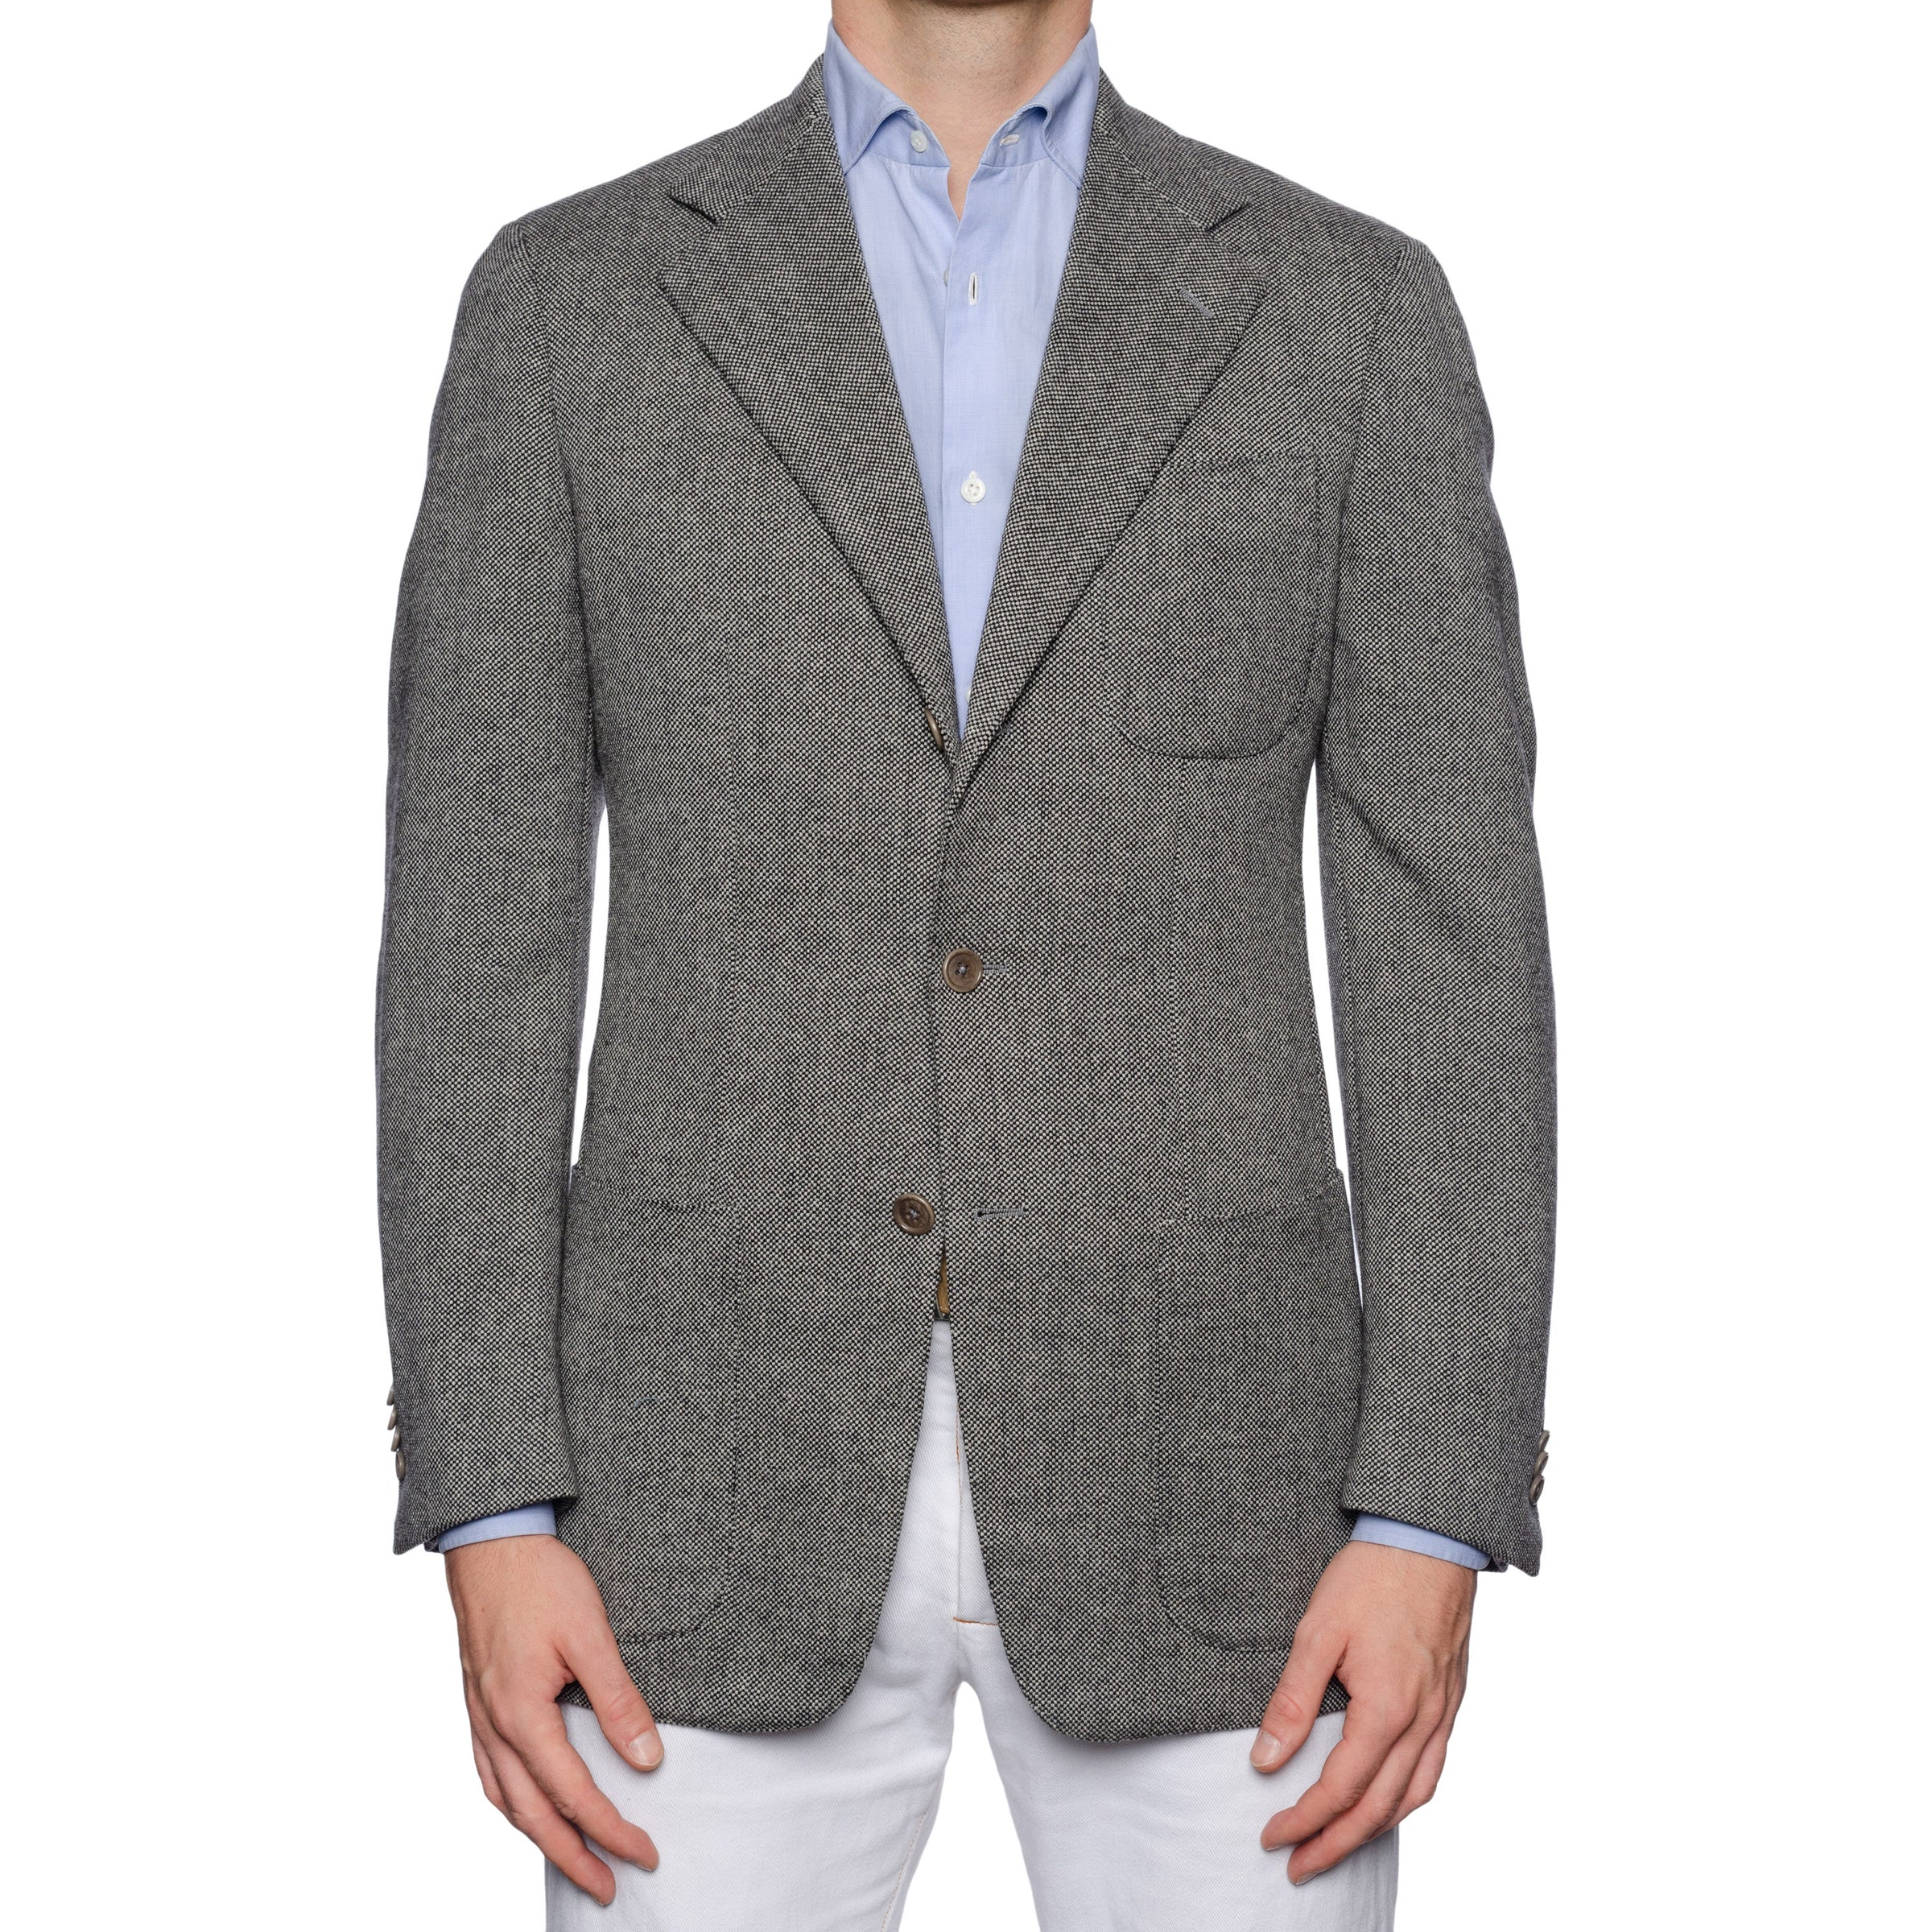 CASTANGIA 1850 Gray Micro Check Wool Flannel Unlined Sport Coat Jacket